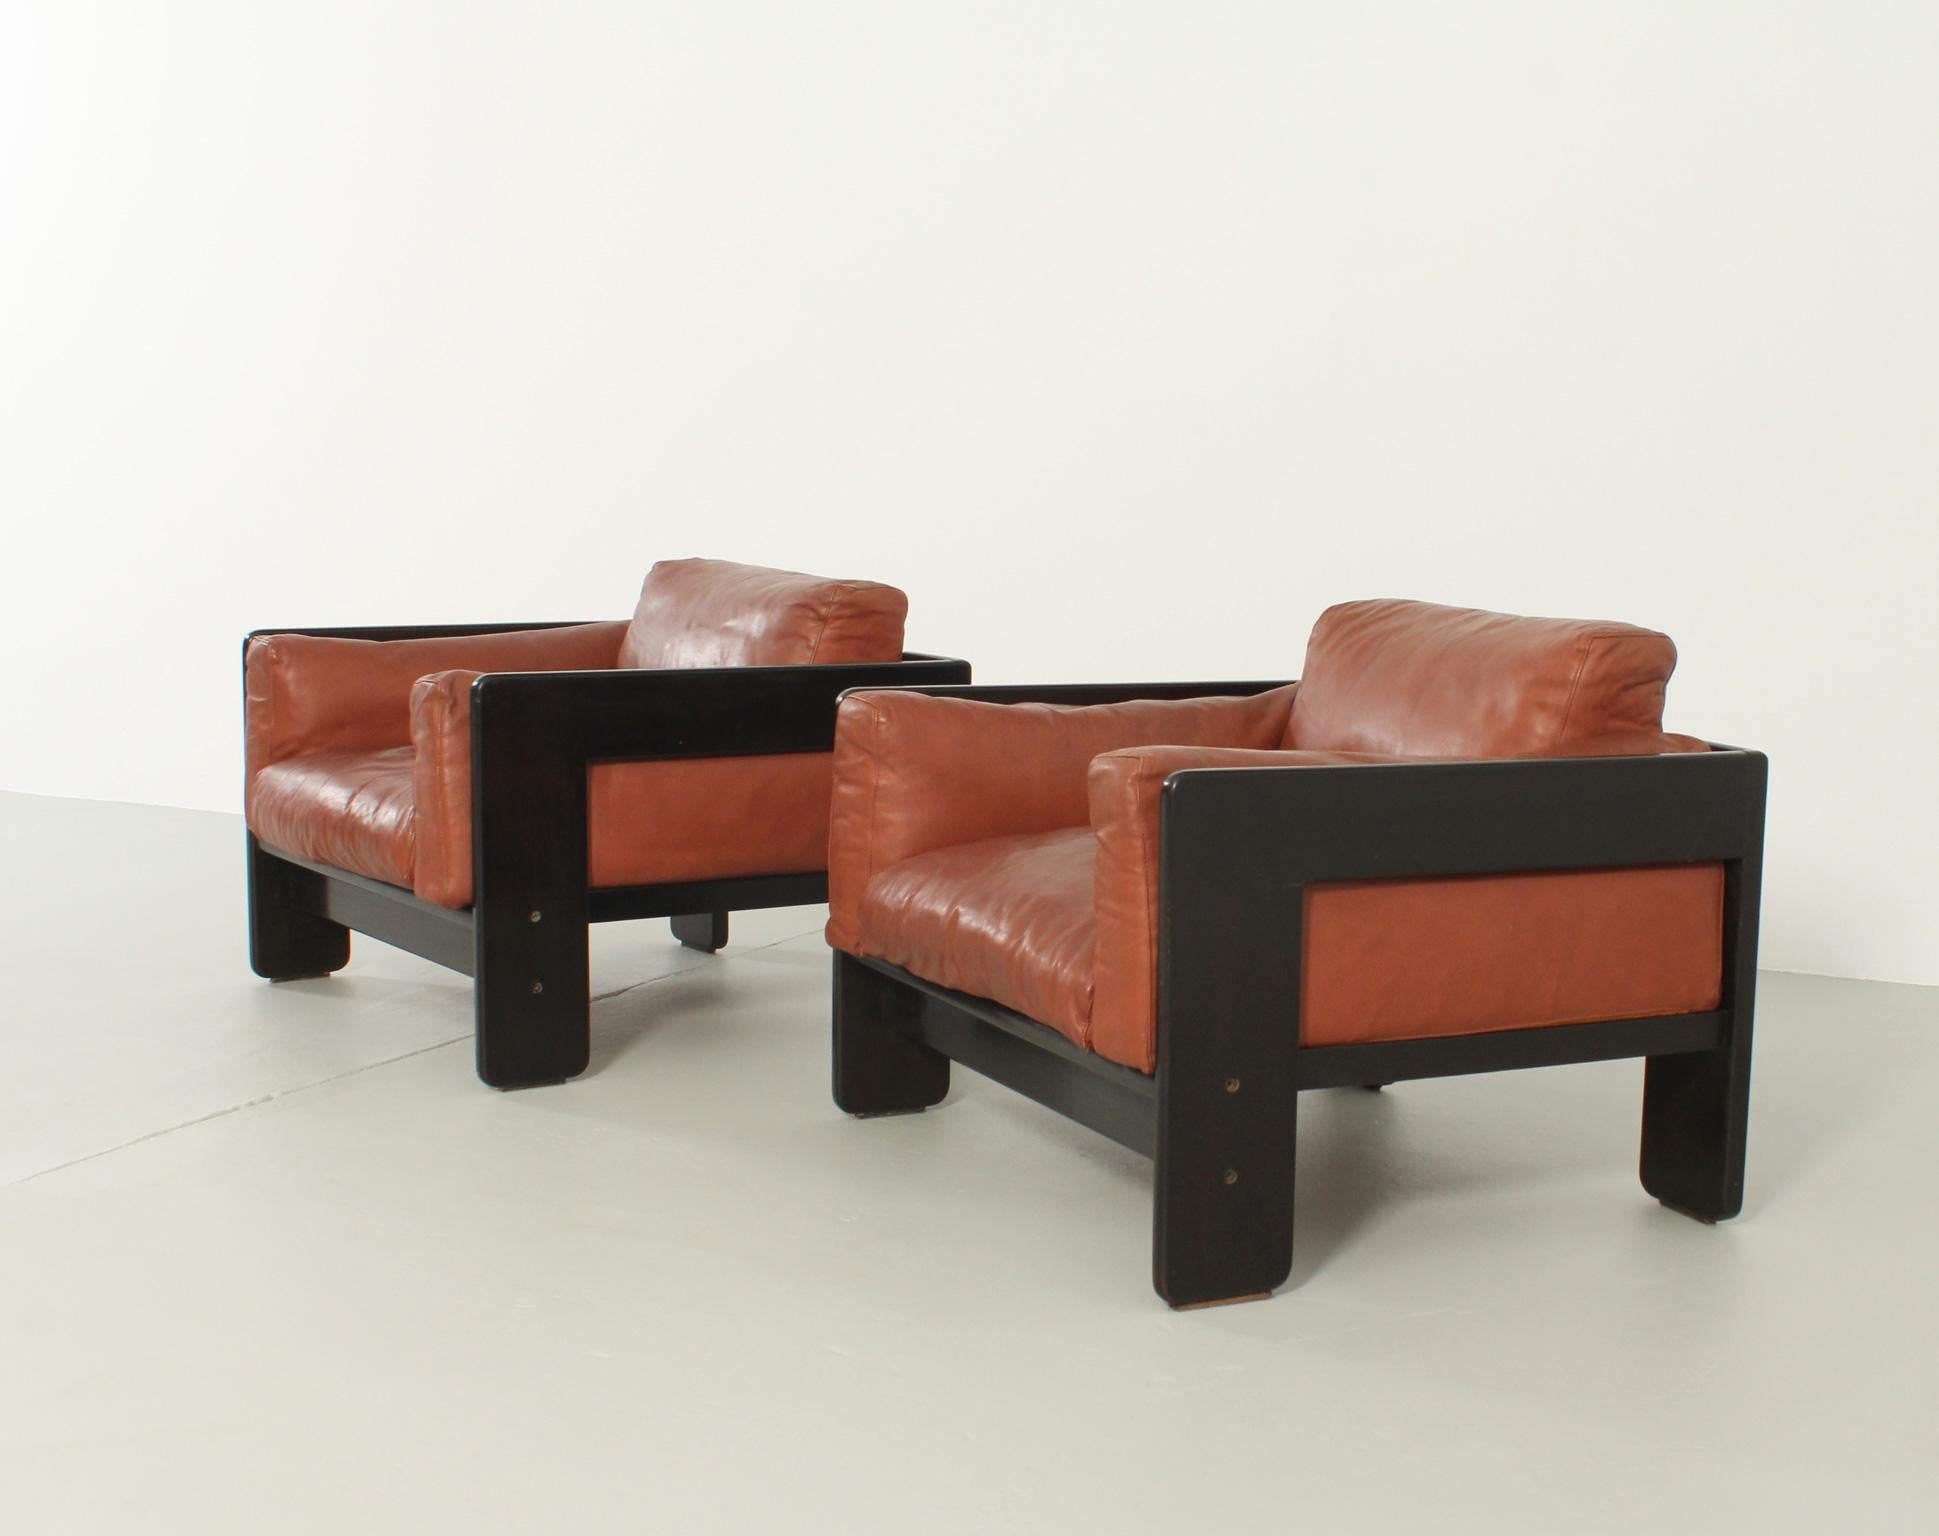 Pair of Bastiano Armchairs by Tobia Scarpa for Gavina, 1960 For Sale 4